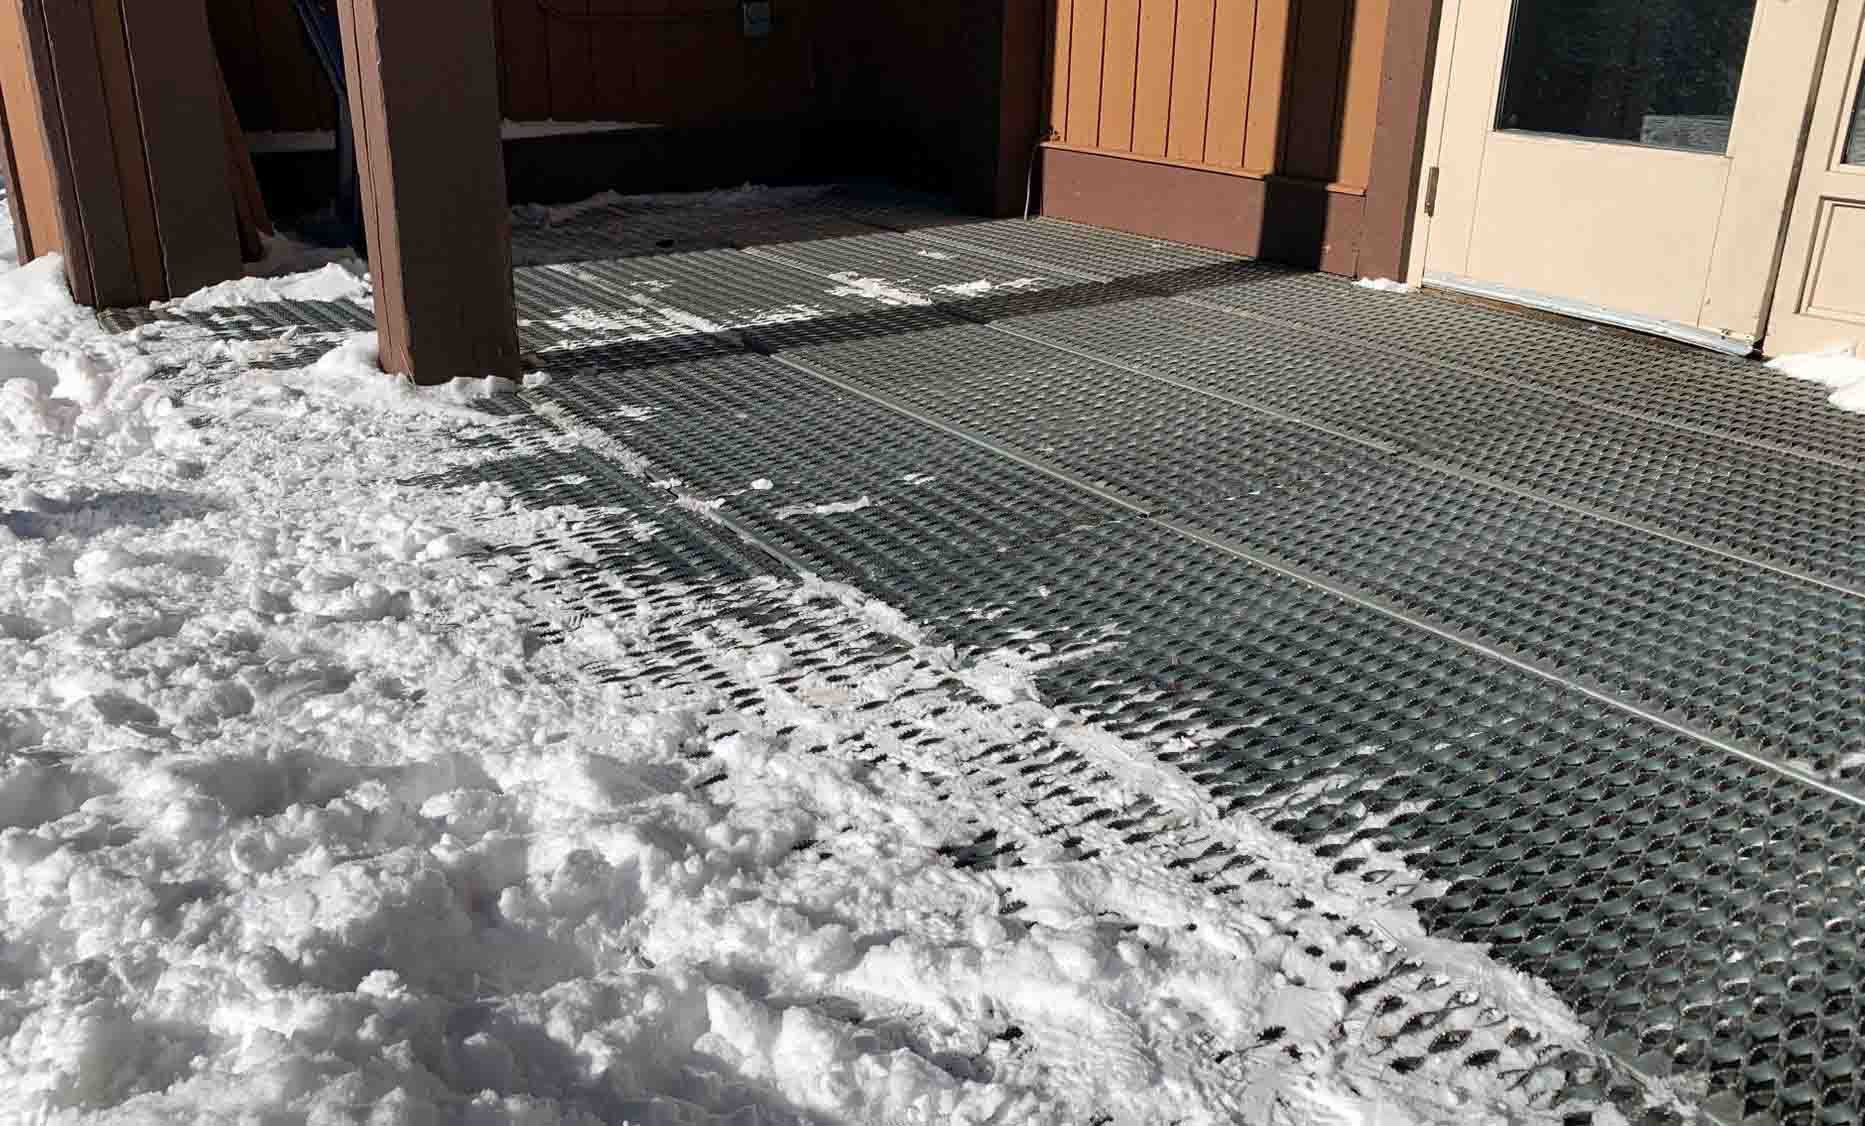 Plank Grating outside the door of a ski lodge in Colorado.